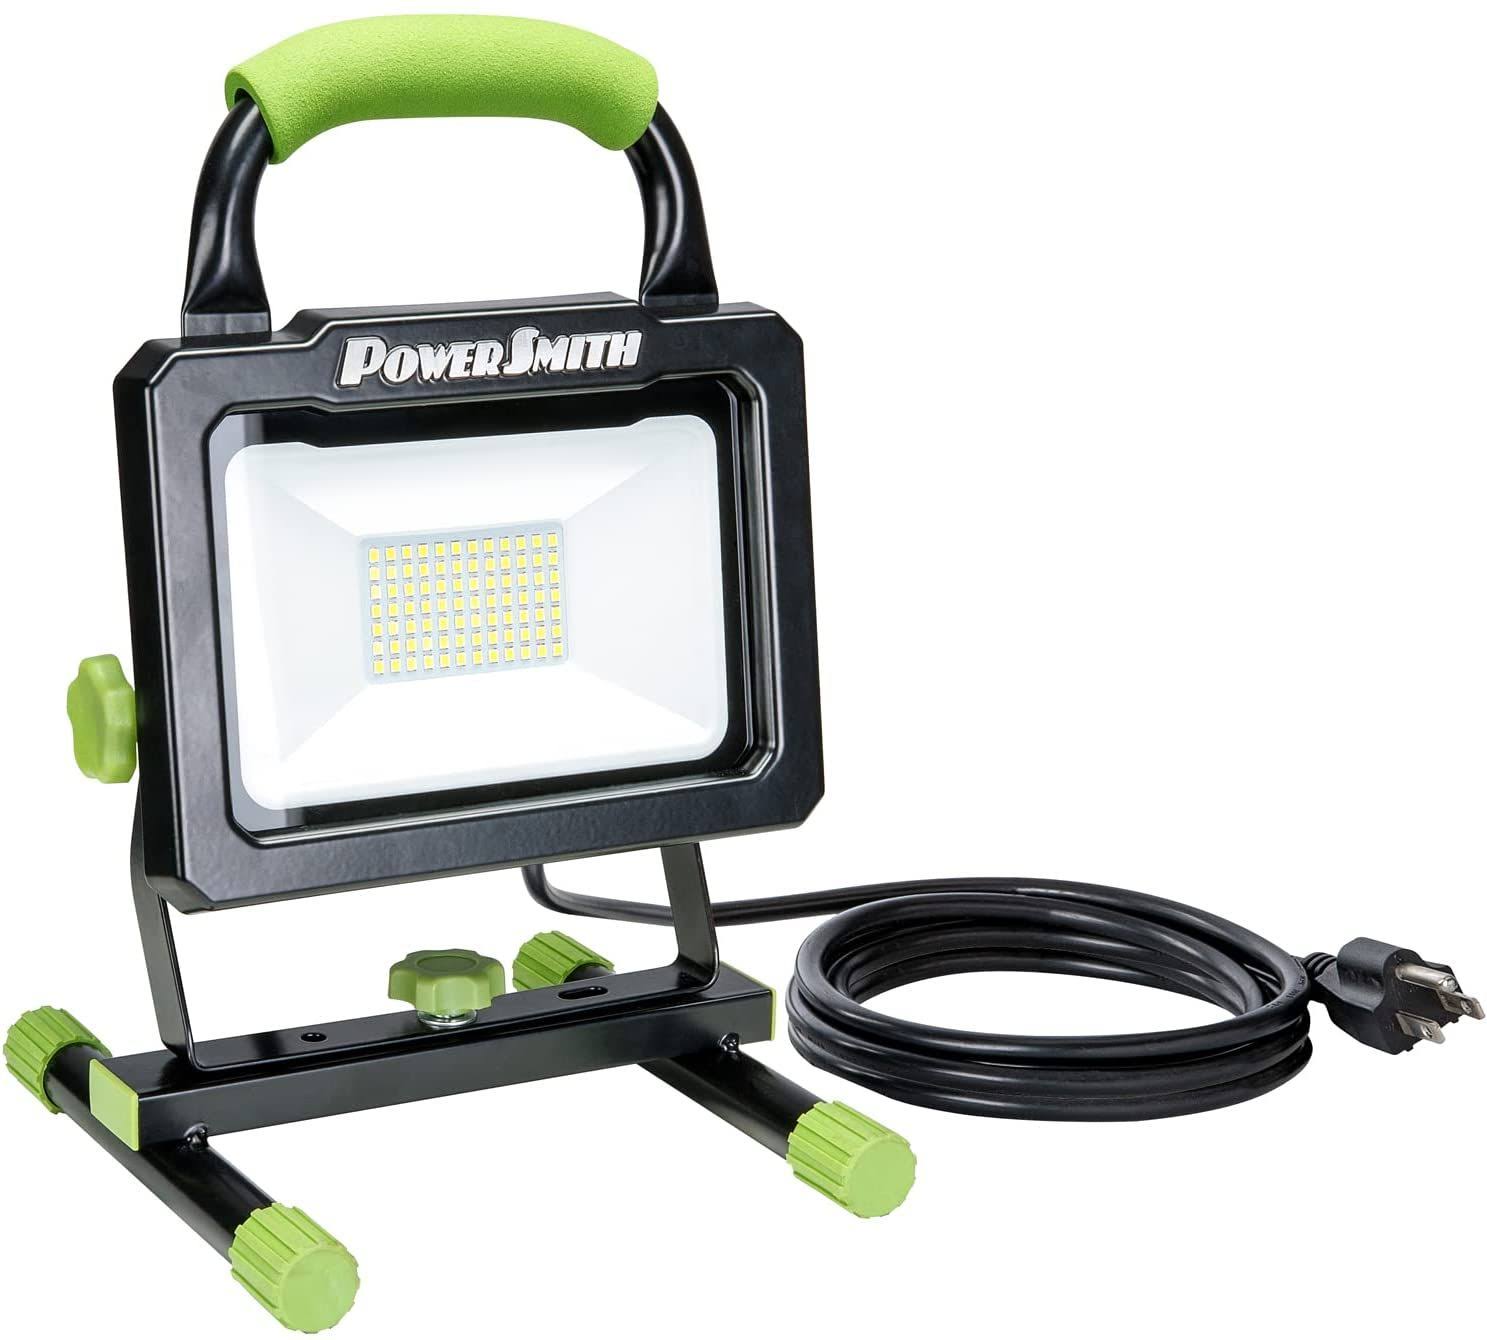 PowerSmith 7, 000 Lumen Portable LED Work Light With Metal Stand And Housing, Sealed On/Off Switch